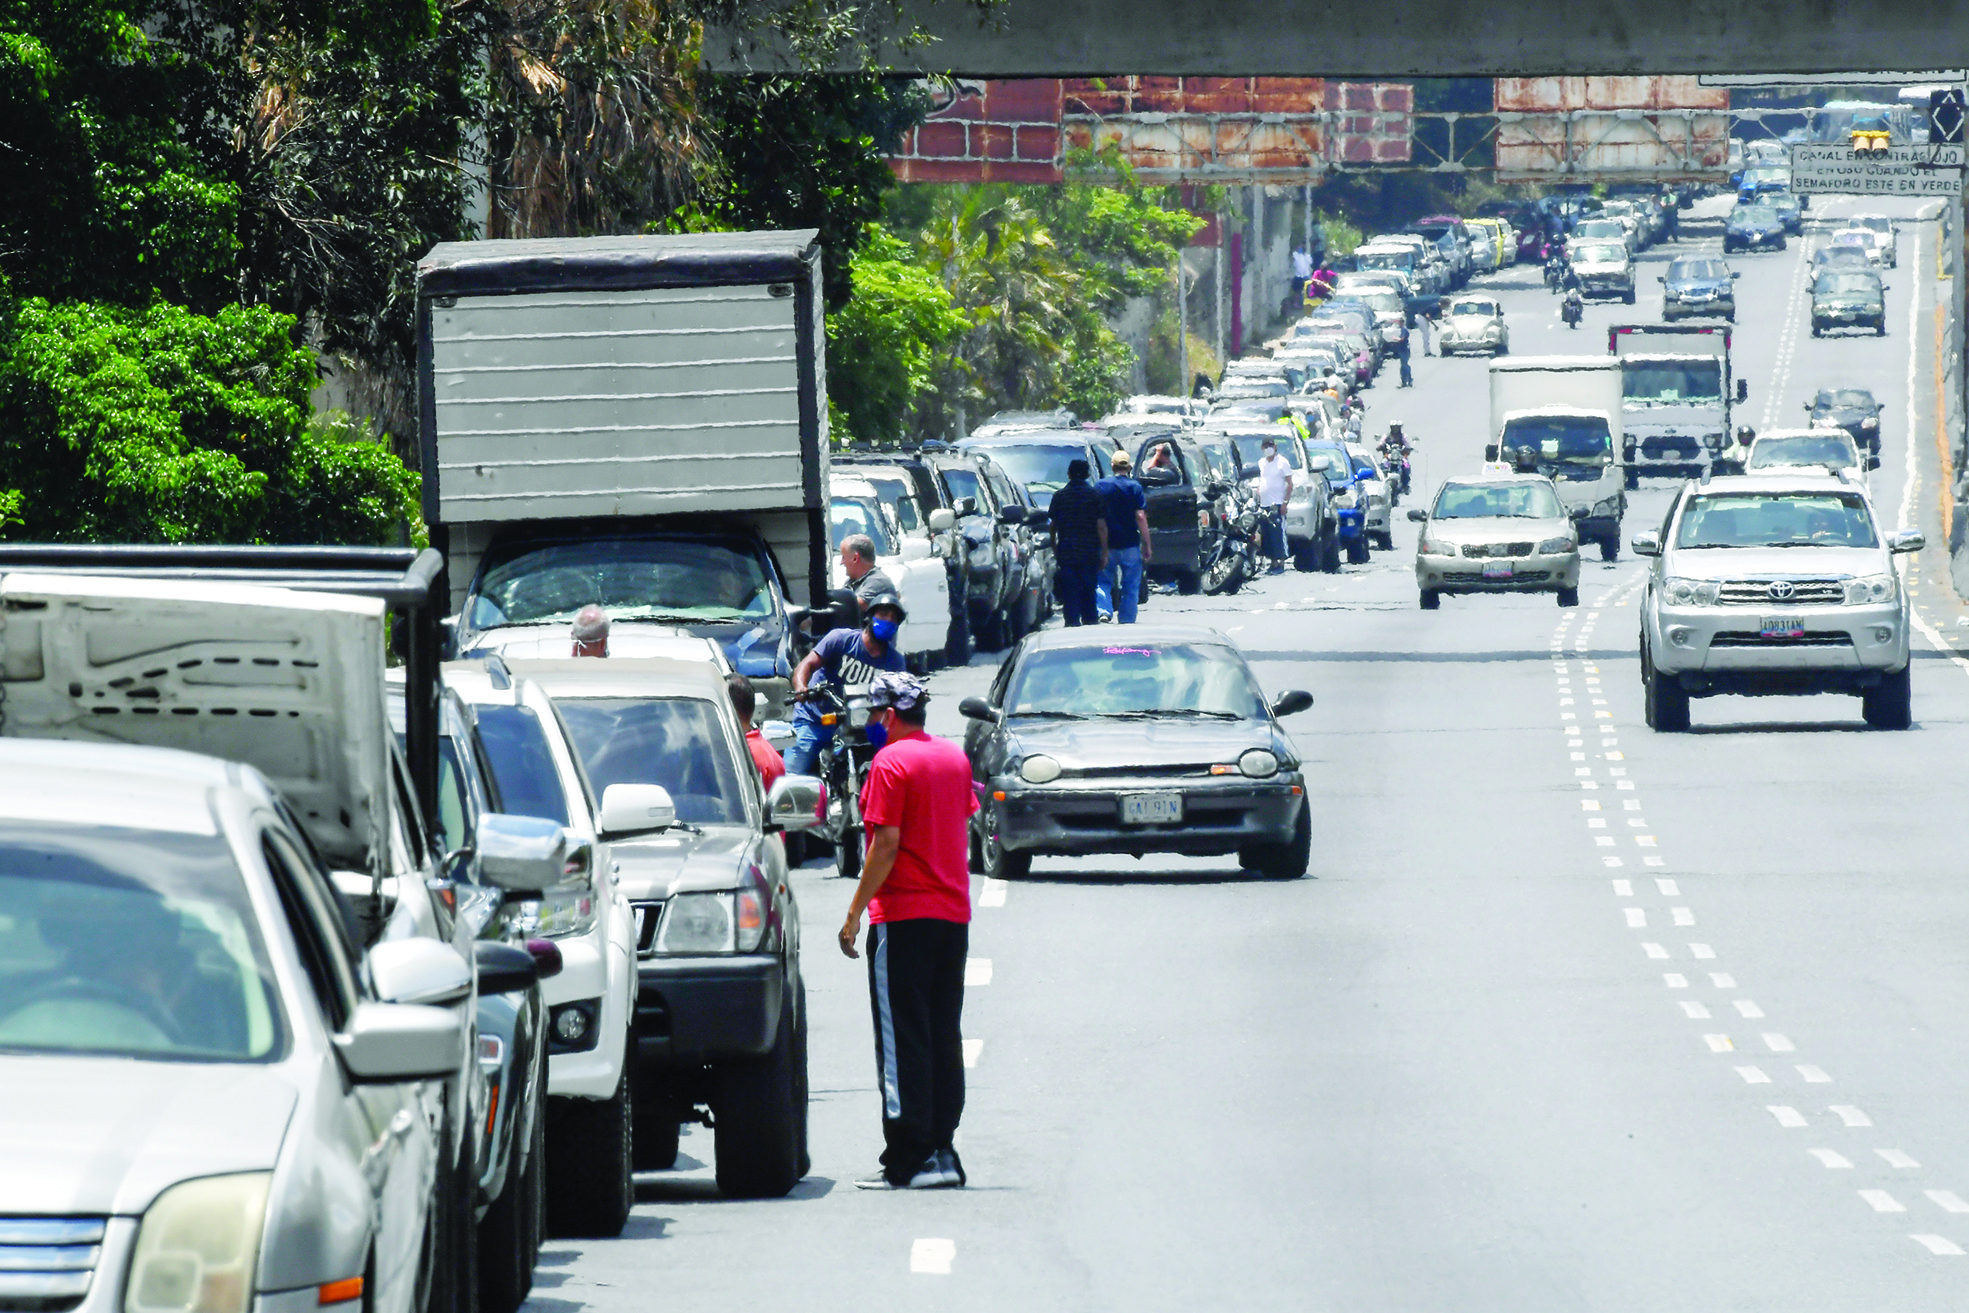 CARACAS: Drivers queue to refuel the tanks of their cars near a gas station, in Caracas on Wednesday. Falling fossil fuel demand coupled with mounting risk for investors could slash the value of oil, gas and coal reserves by two thirds, energy analysts warned yesterday. — AFP